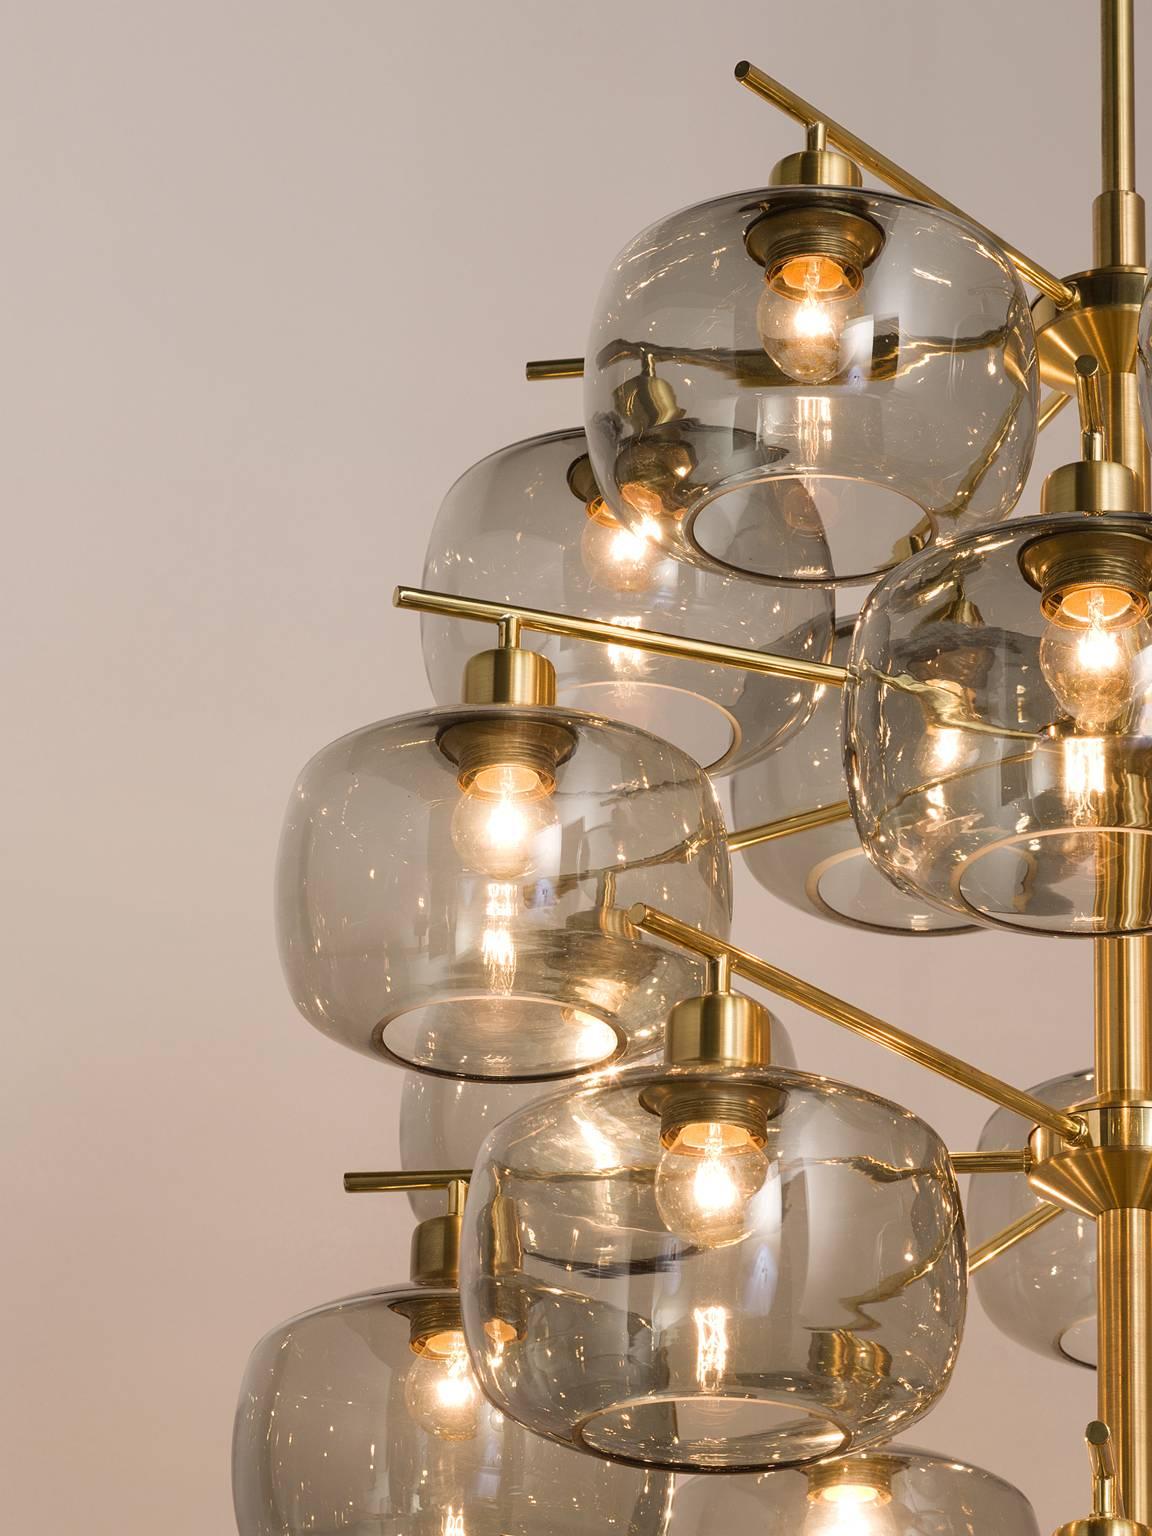 Swedish Eight Holger Johansson Chandeliers with 24 Smoked Glass Bulbs, 1952